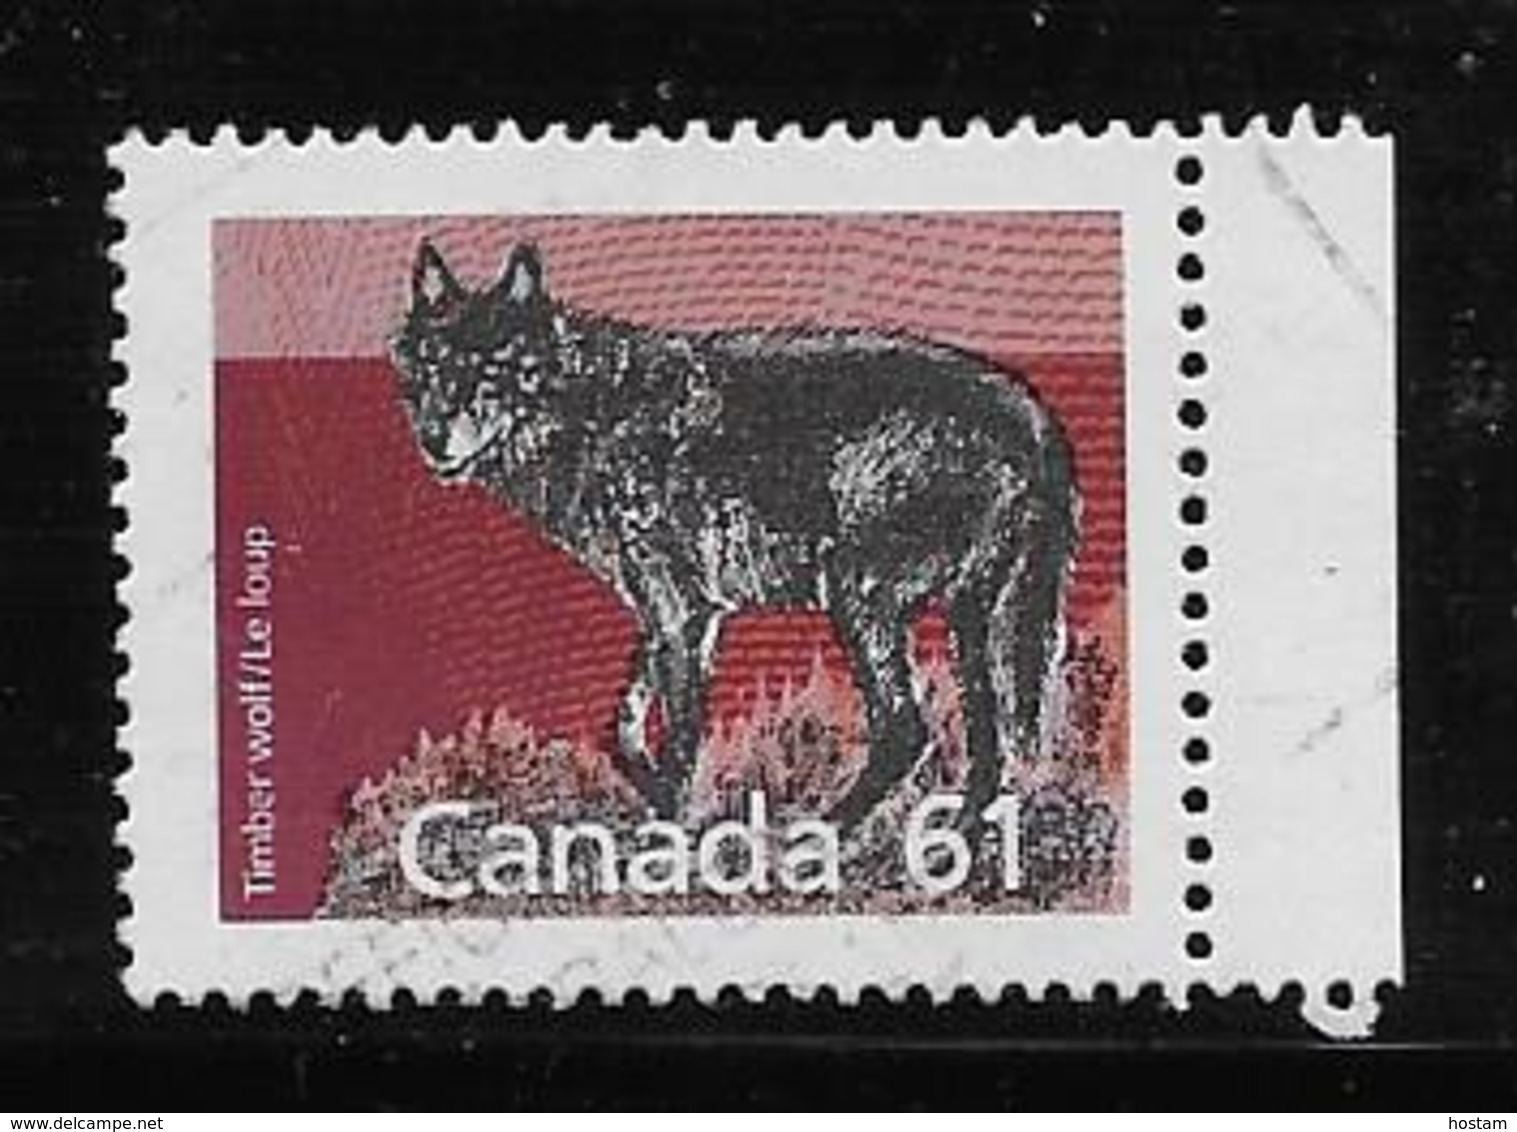 ANADA 1989, USED # 1175,  MAMALS DEFINITIVES: TIMBER WOLF,  PERF  14.4 - Oblitérés